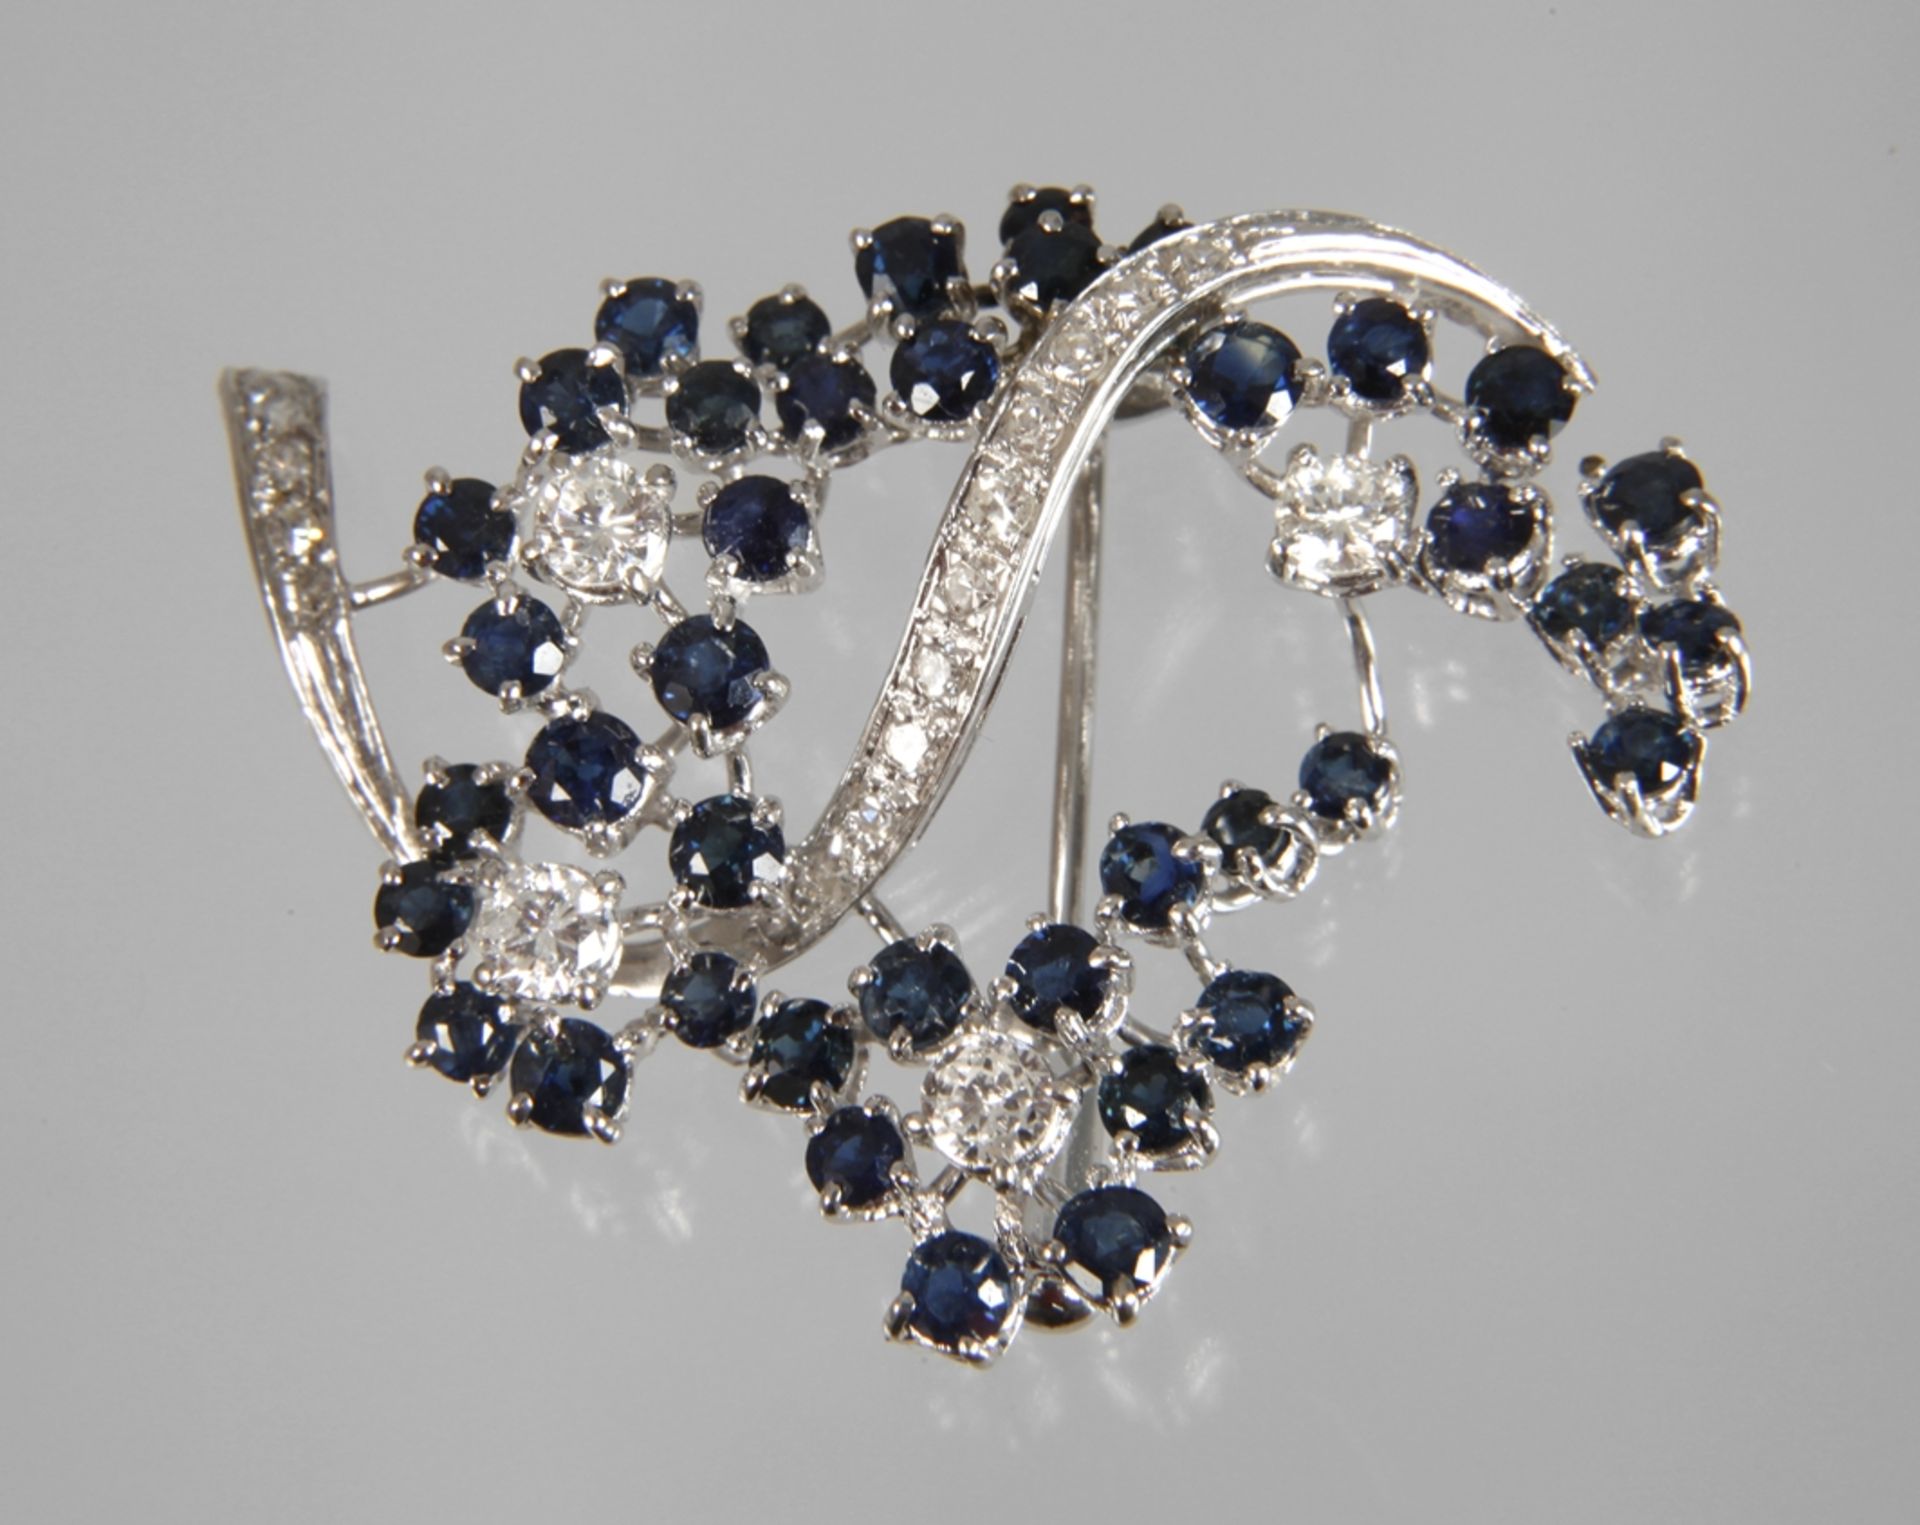 Brooch with sapphire and brilliant-cut diamonds